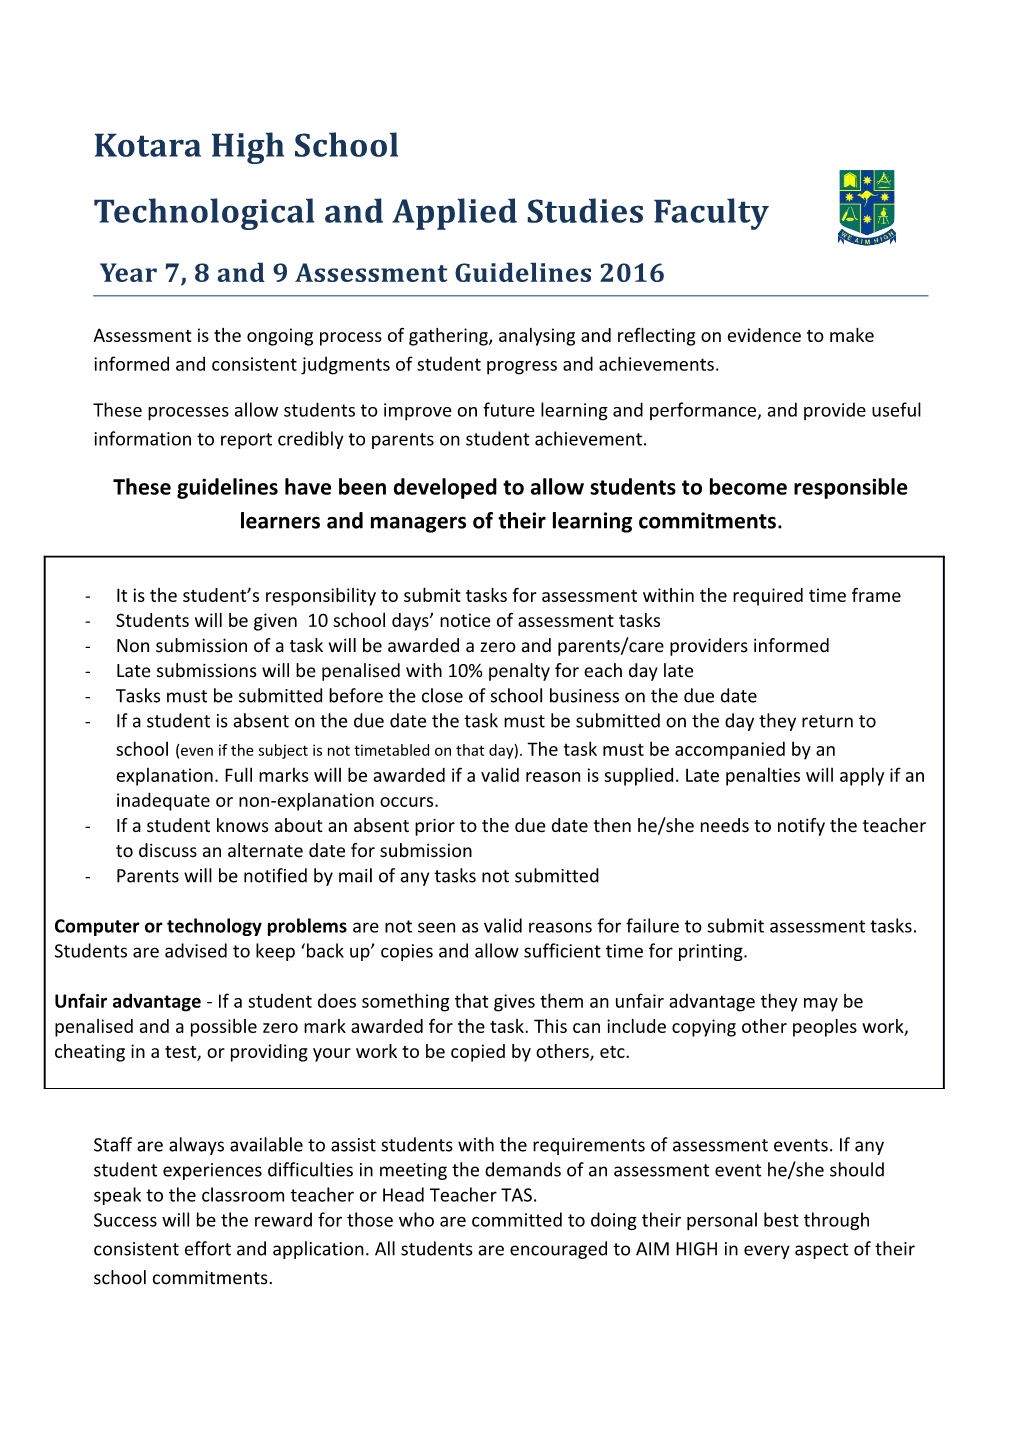 Year 7, 8 and 9 Assessment Guidelines 2016